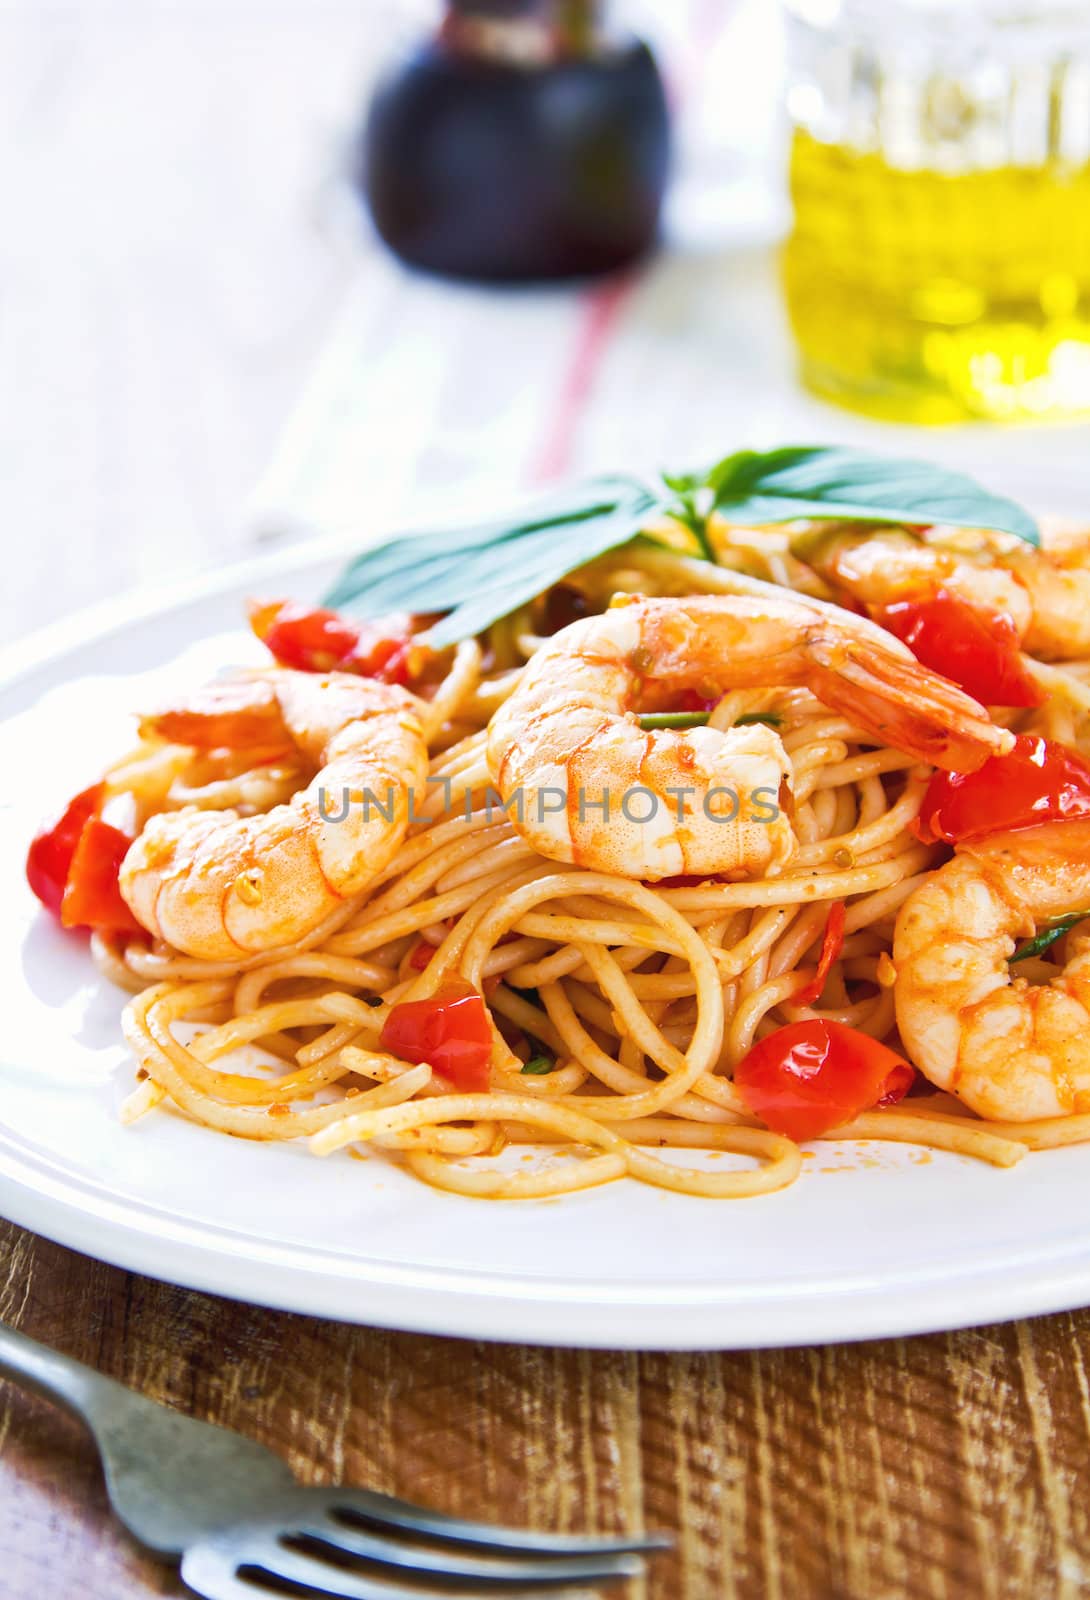 Spaghetti with prawn and tomato by vanillaechoes